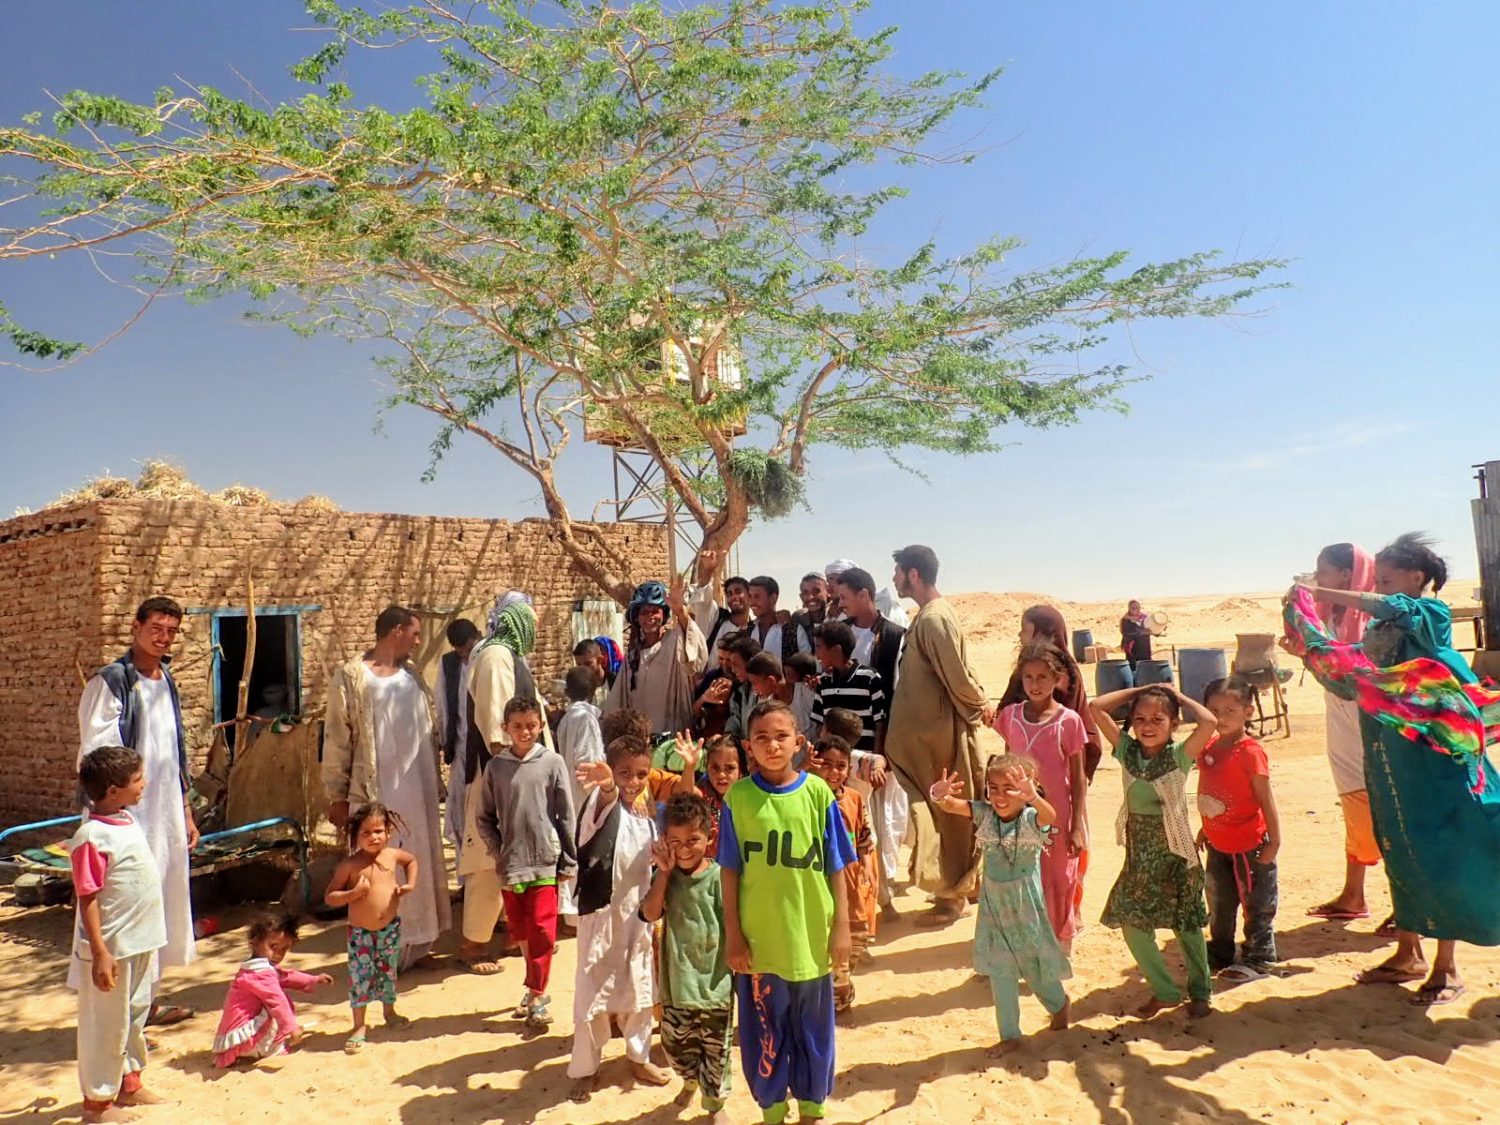 Large family outside mud hut in Sudan desert waving and smiling